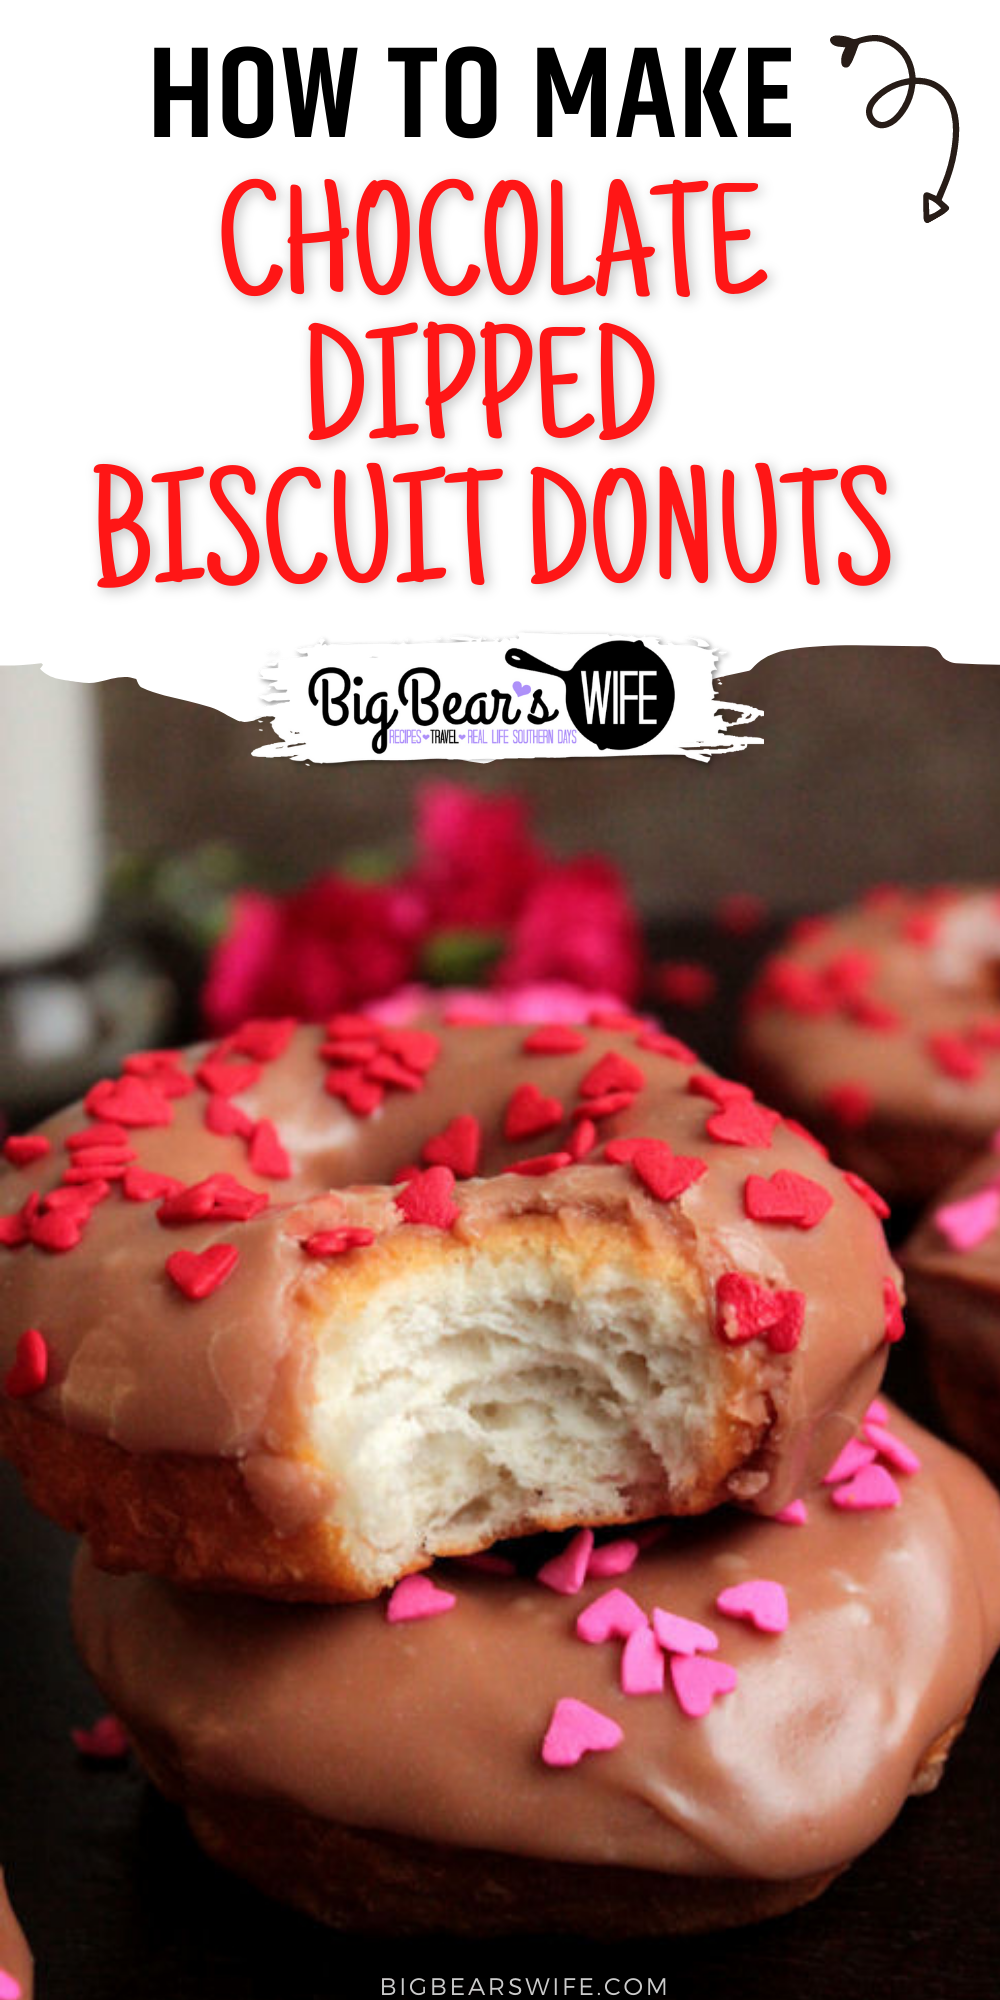 Want a quick and easy Valentines Donut for you sweetheart? I've got the perfect recipe for you! No donut making skills required! These use canned biscuits! via @bigbearswife